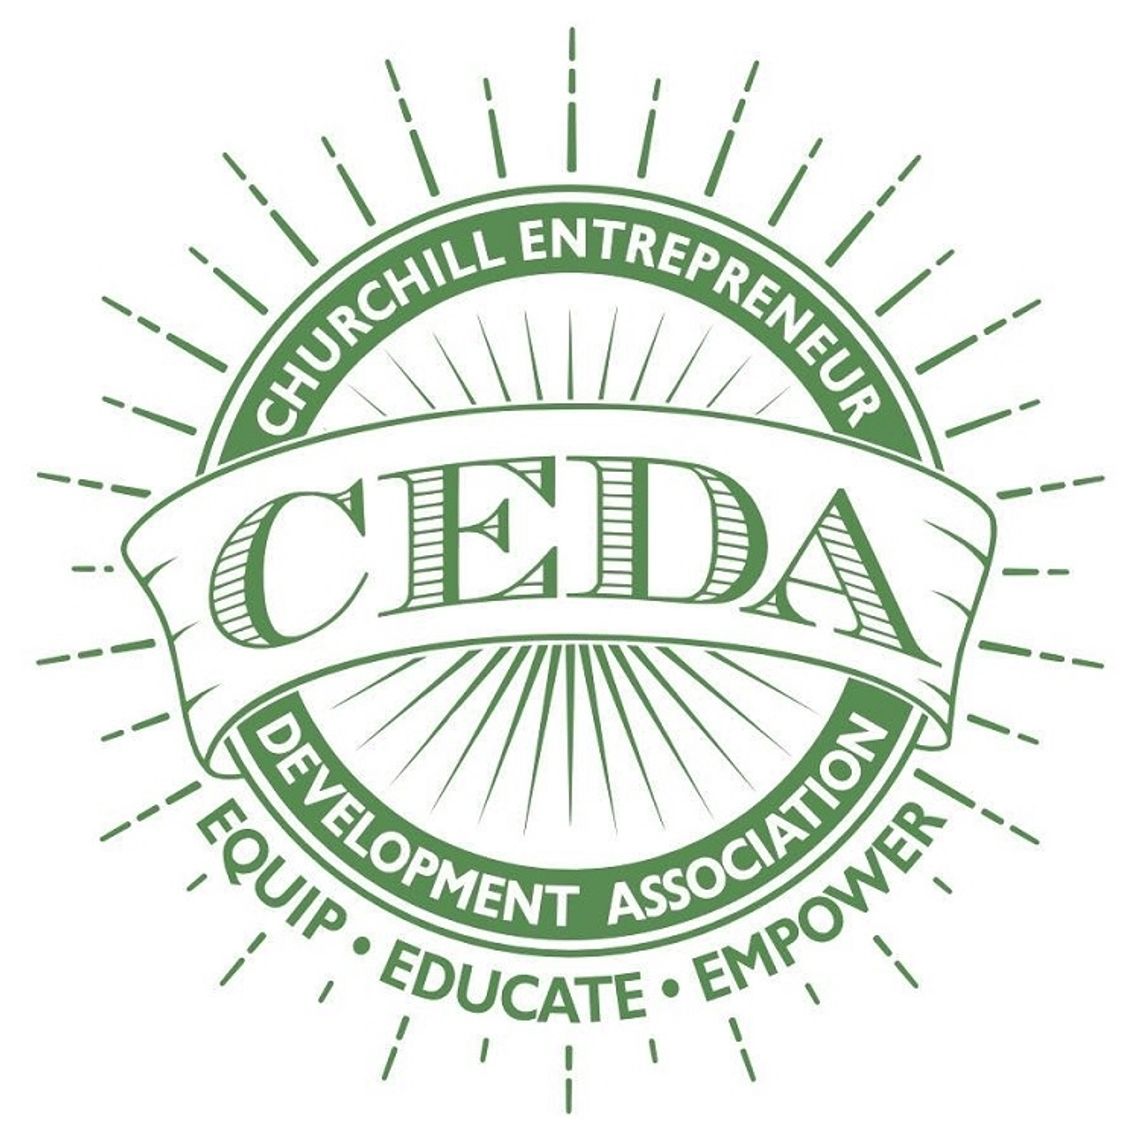 CEDA Holding their “Please Don’t Make Me Attend Another Event” Fundraiser